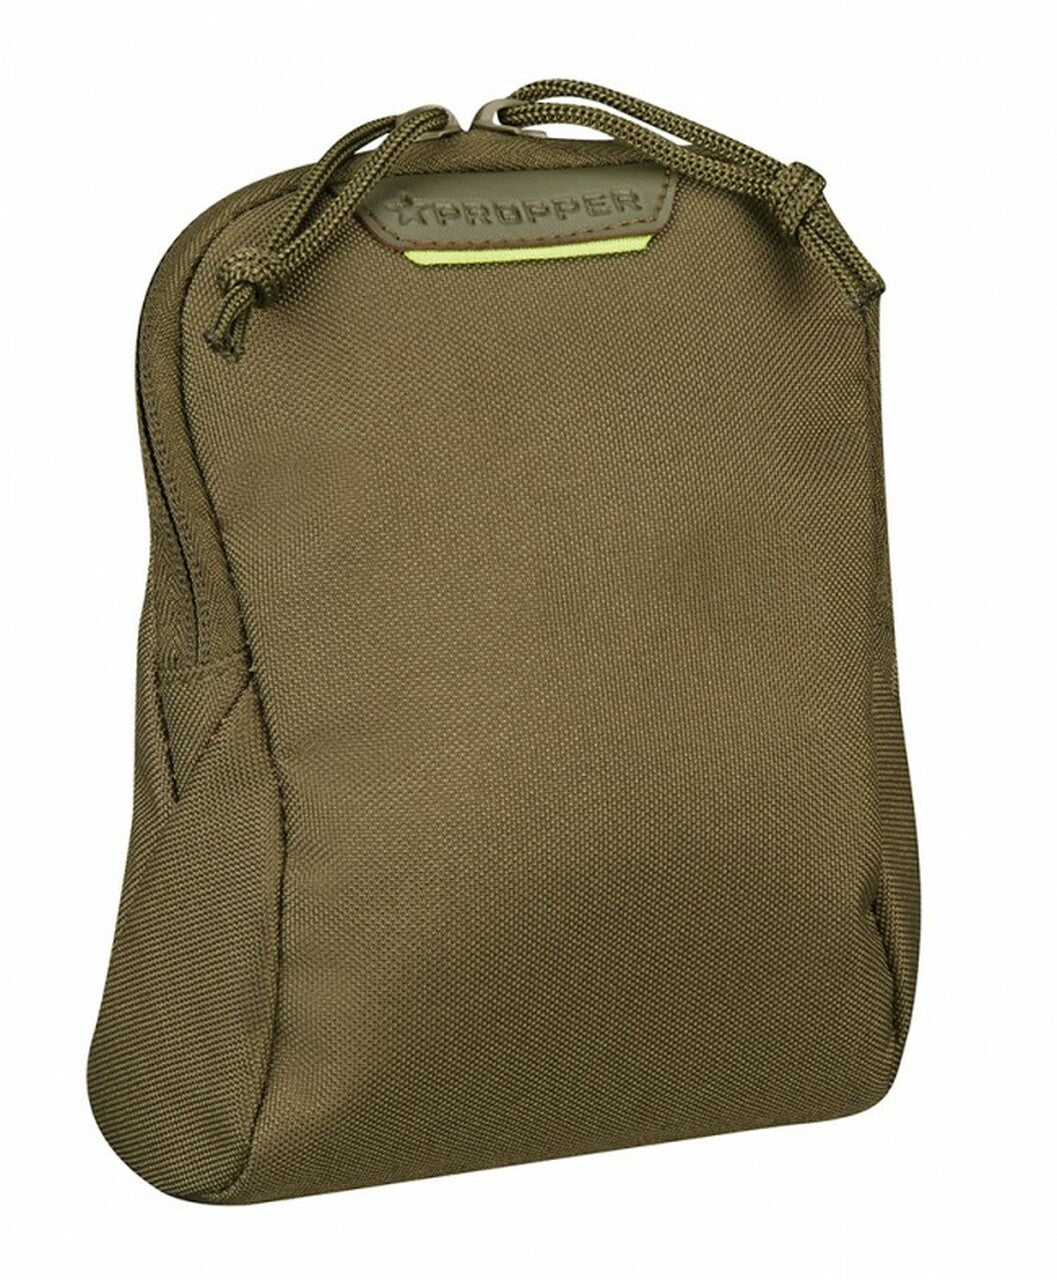 7 x 6" MOLLE Media Pouch